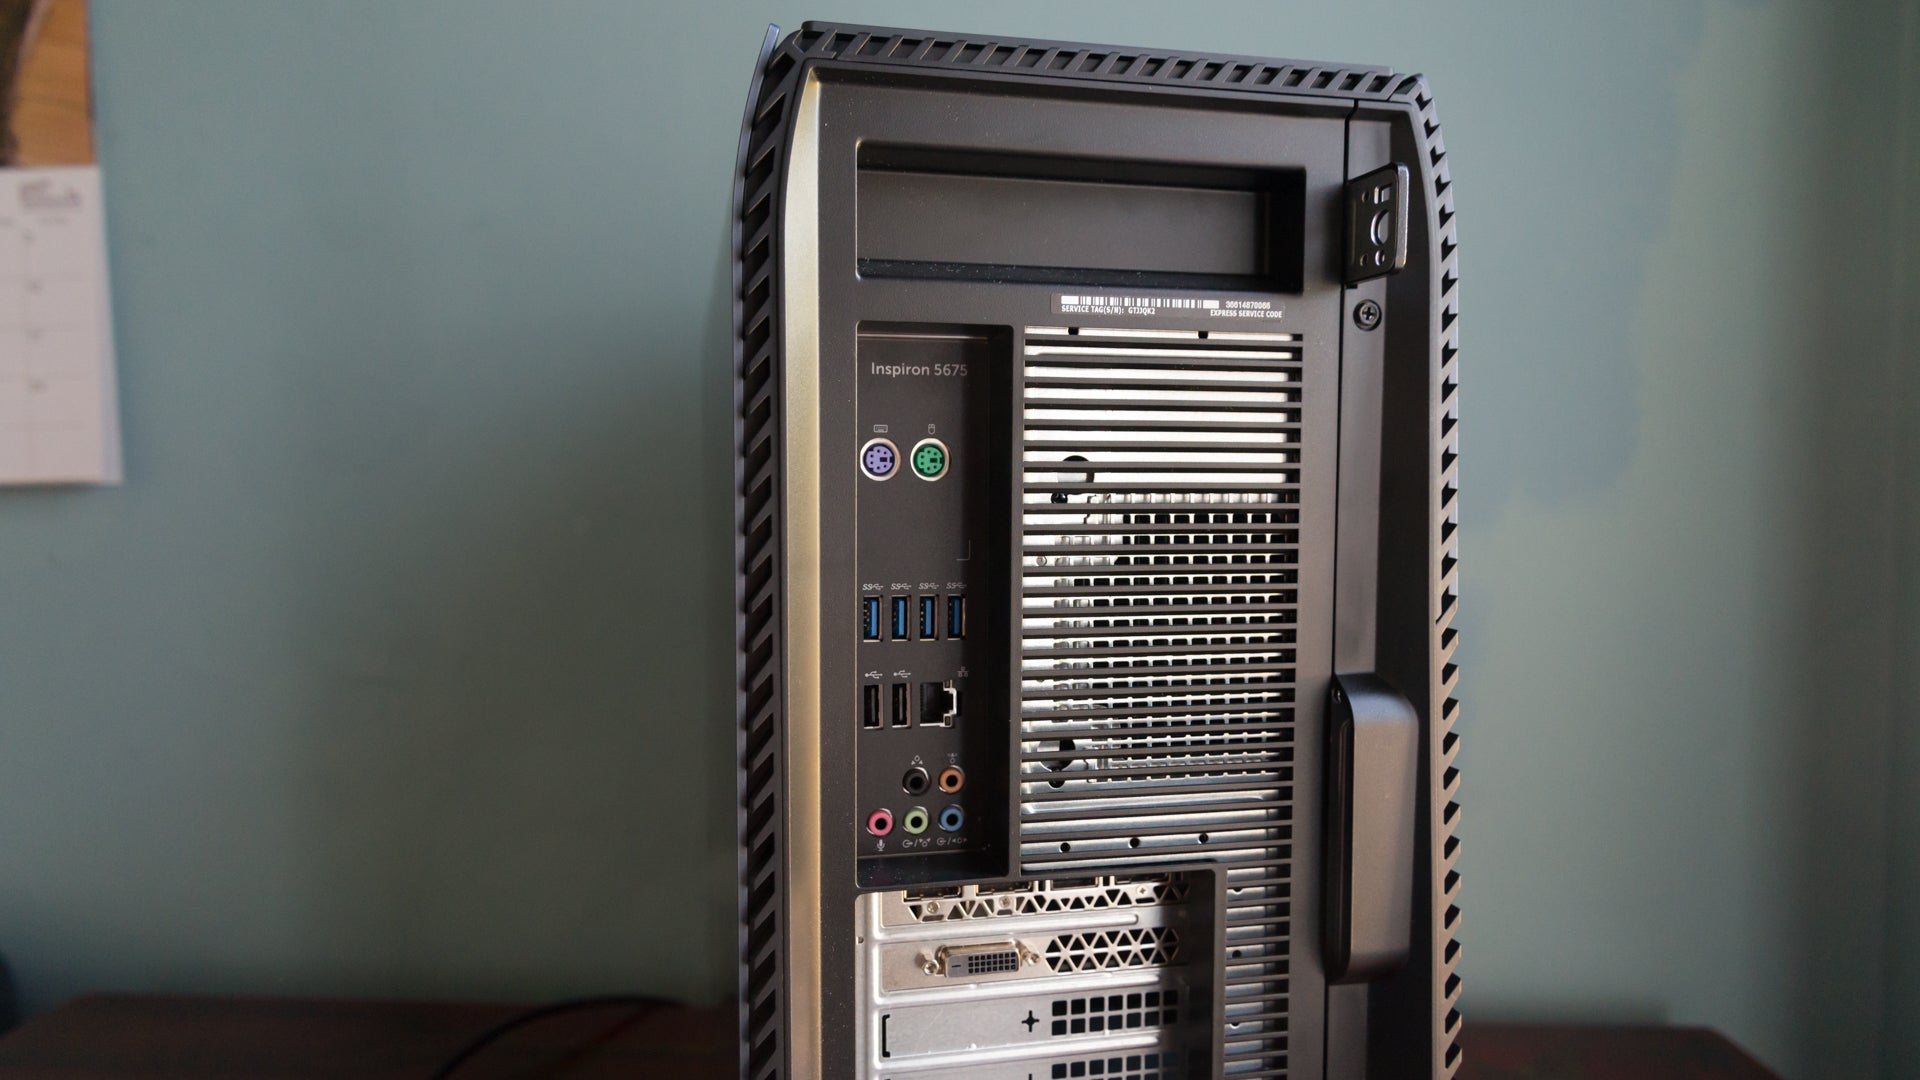 Dell Inspiron 5675 gaming desktop front view.